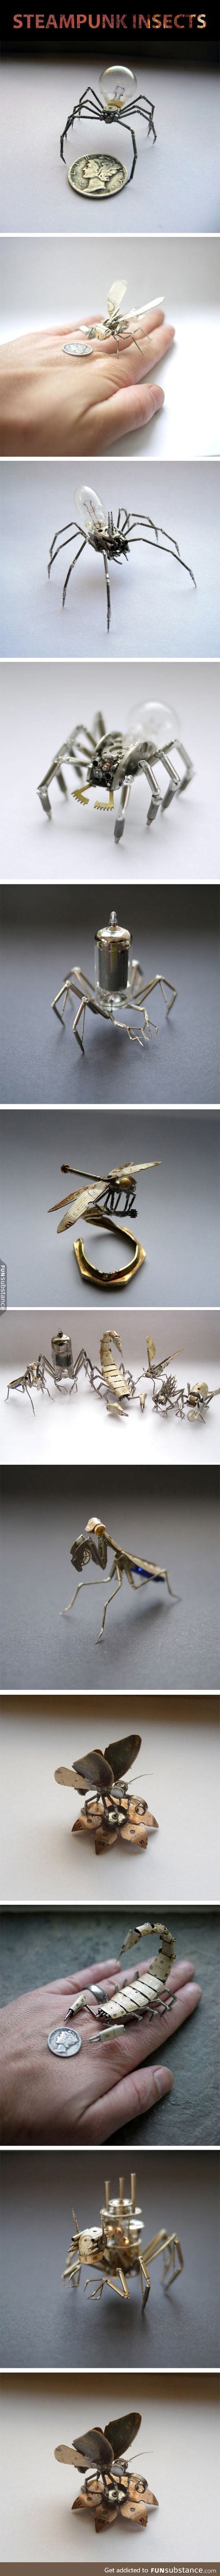 Tiny insects made out of watch parts